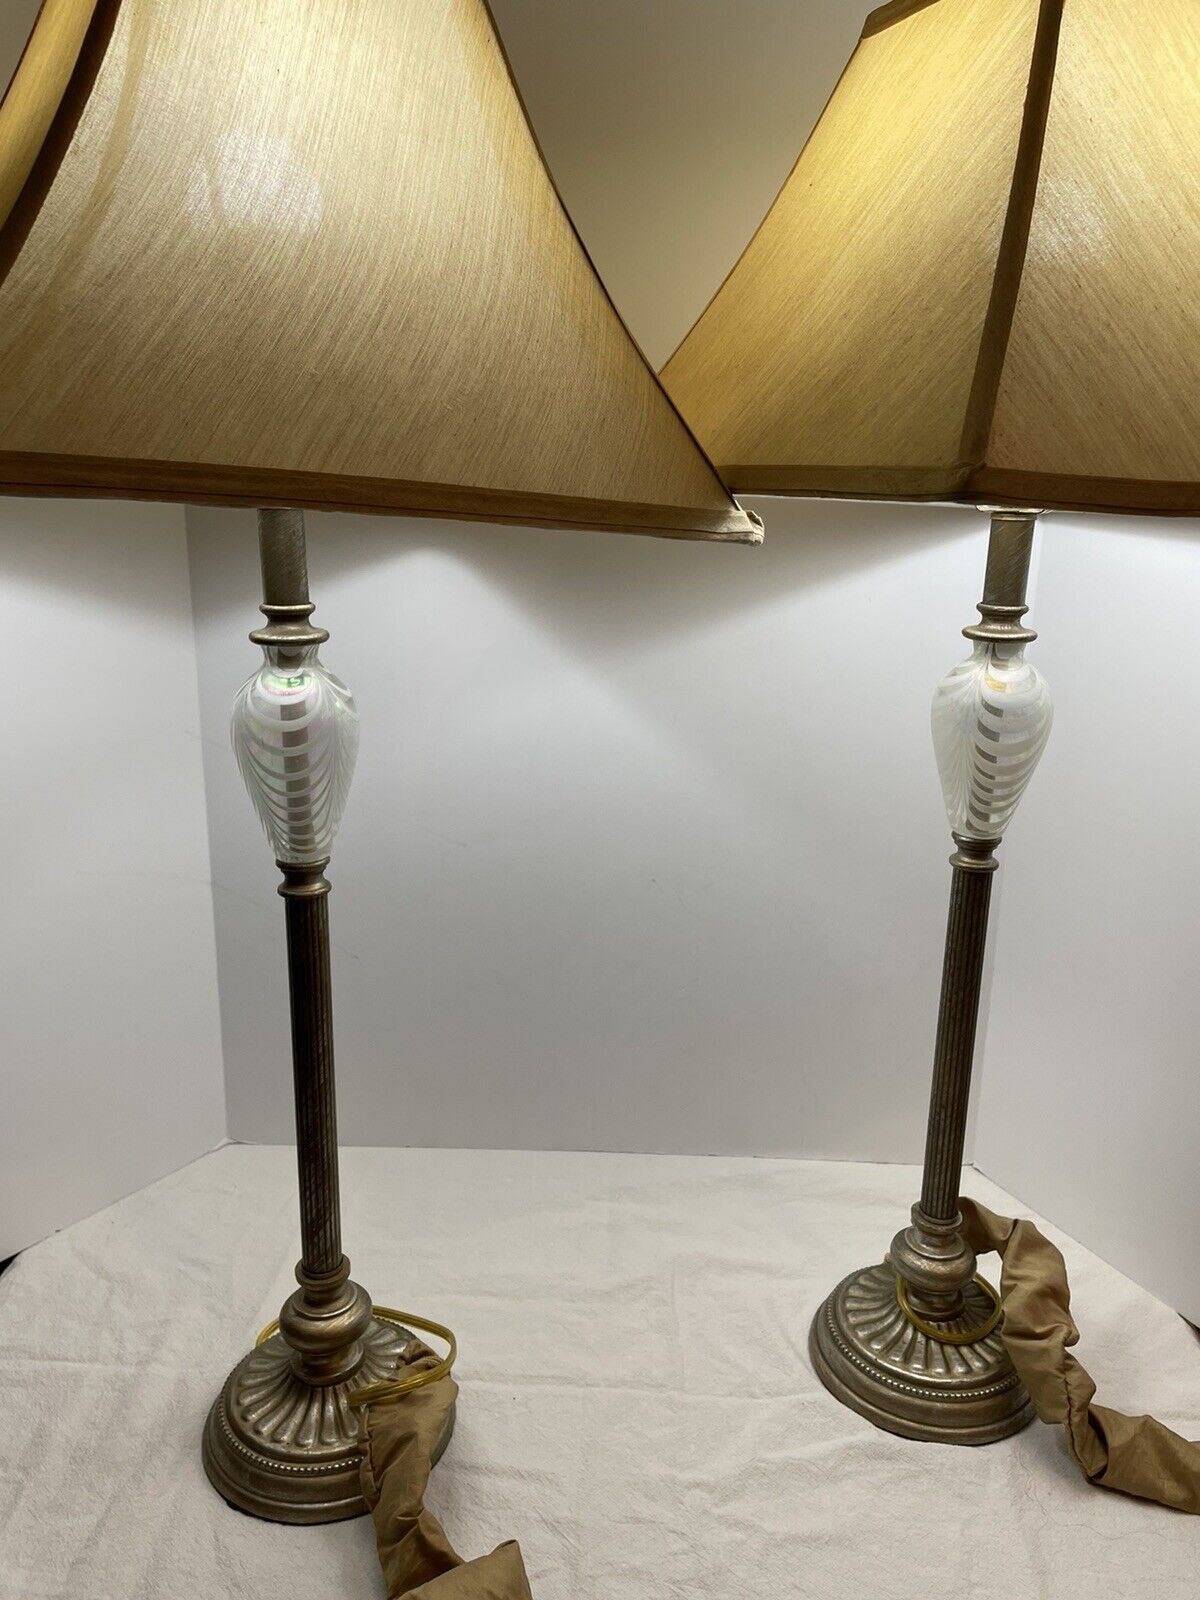 Set 2 Vintage 30” Tall Bombay Pulled Feather Glass Brass Lamps See Description